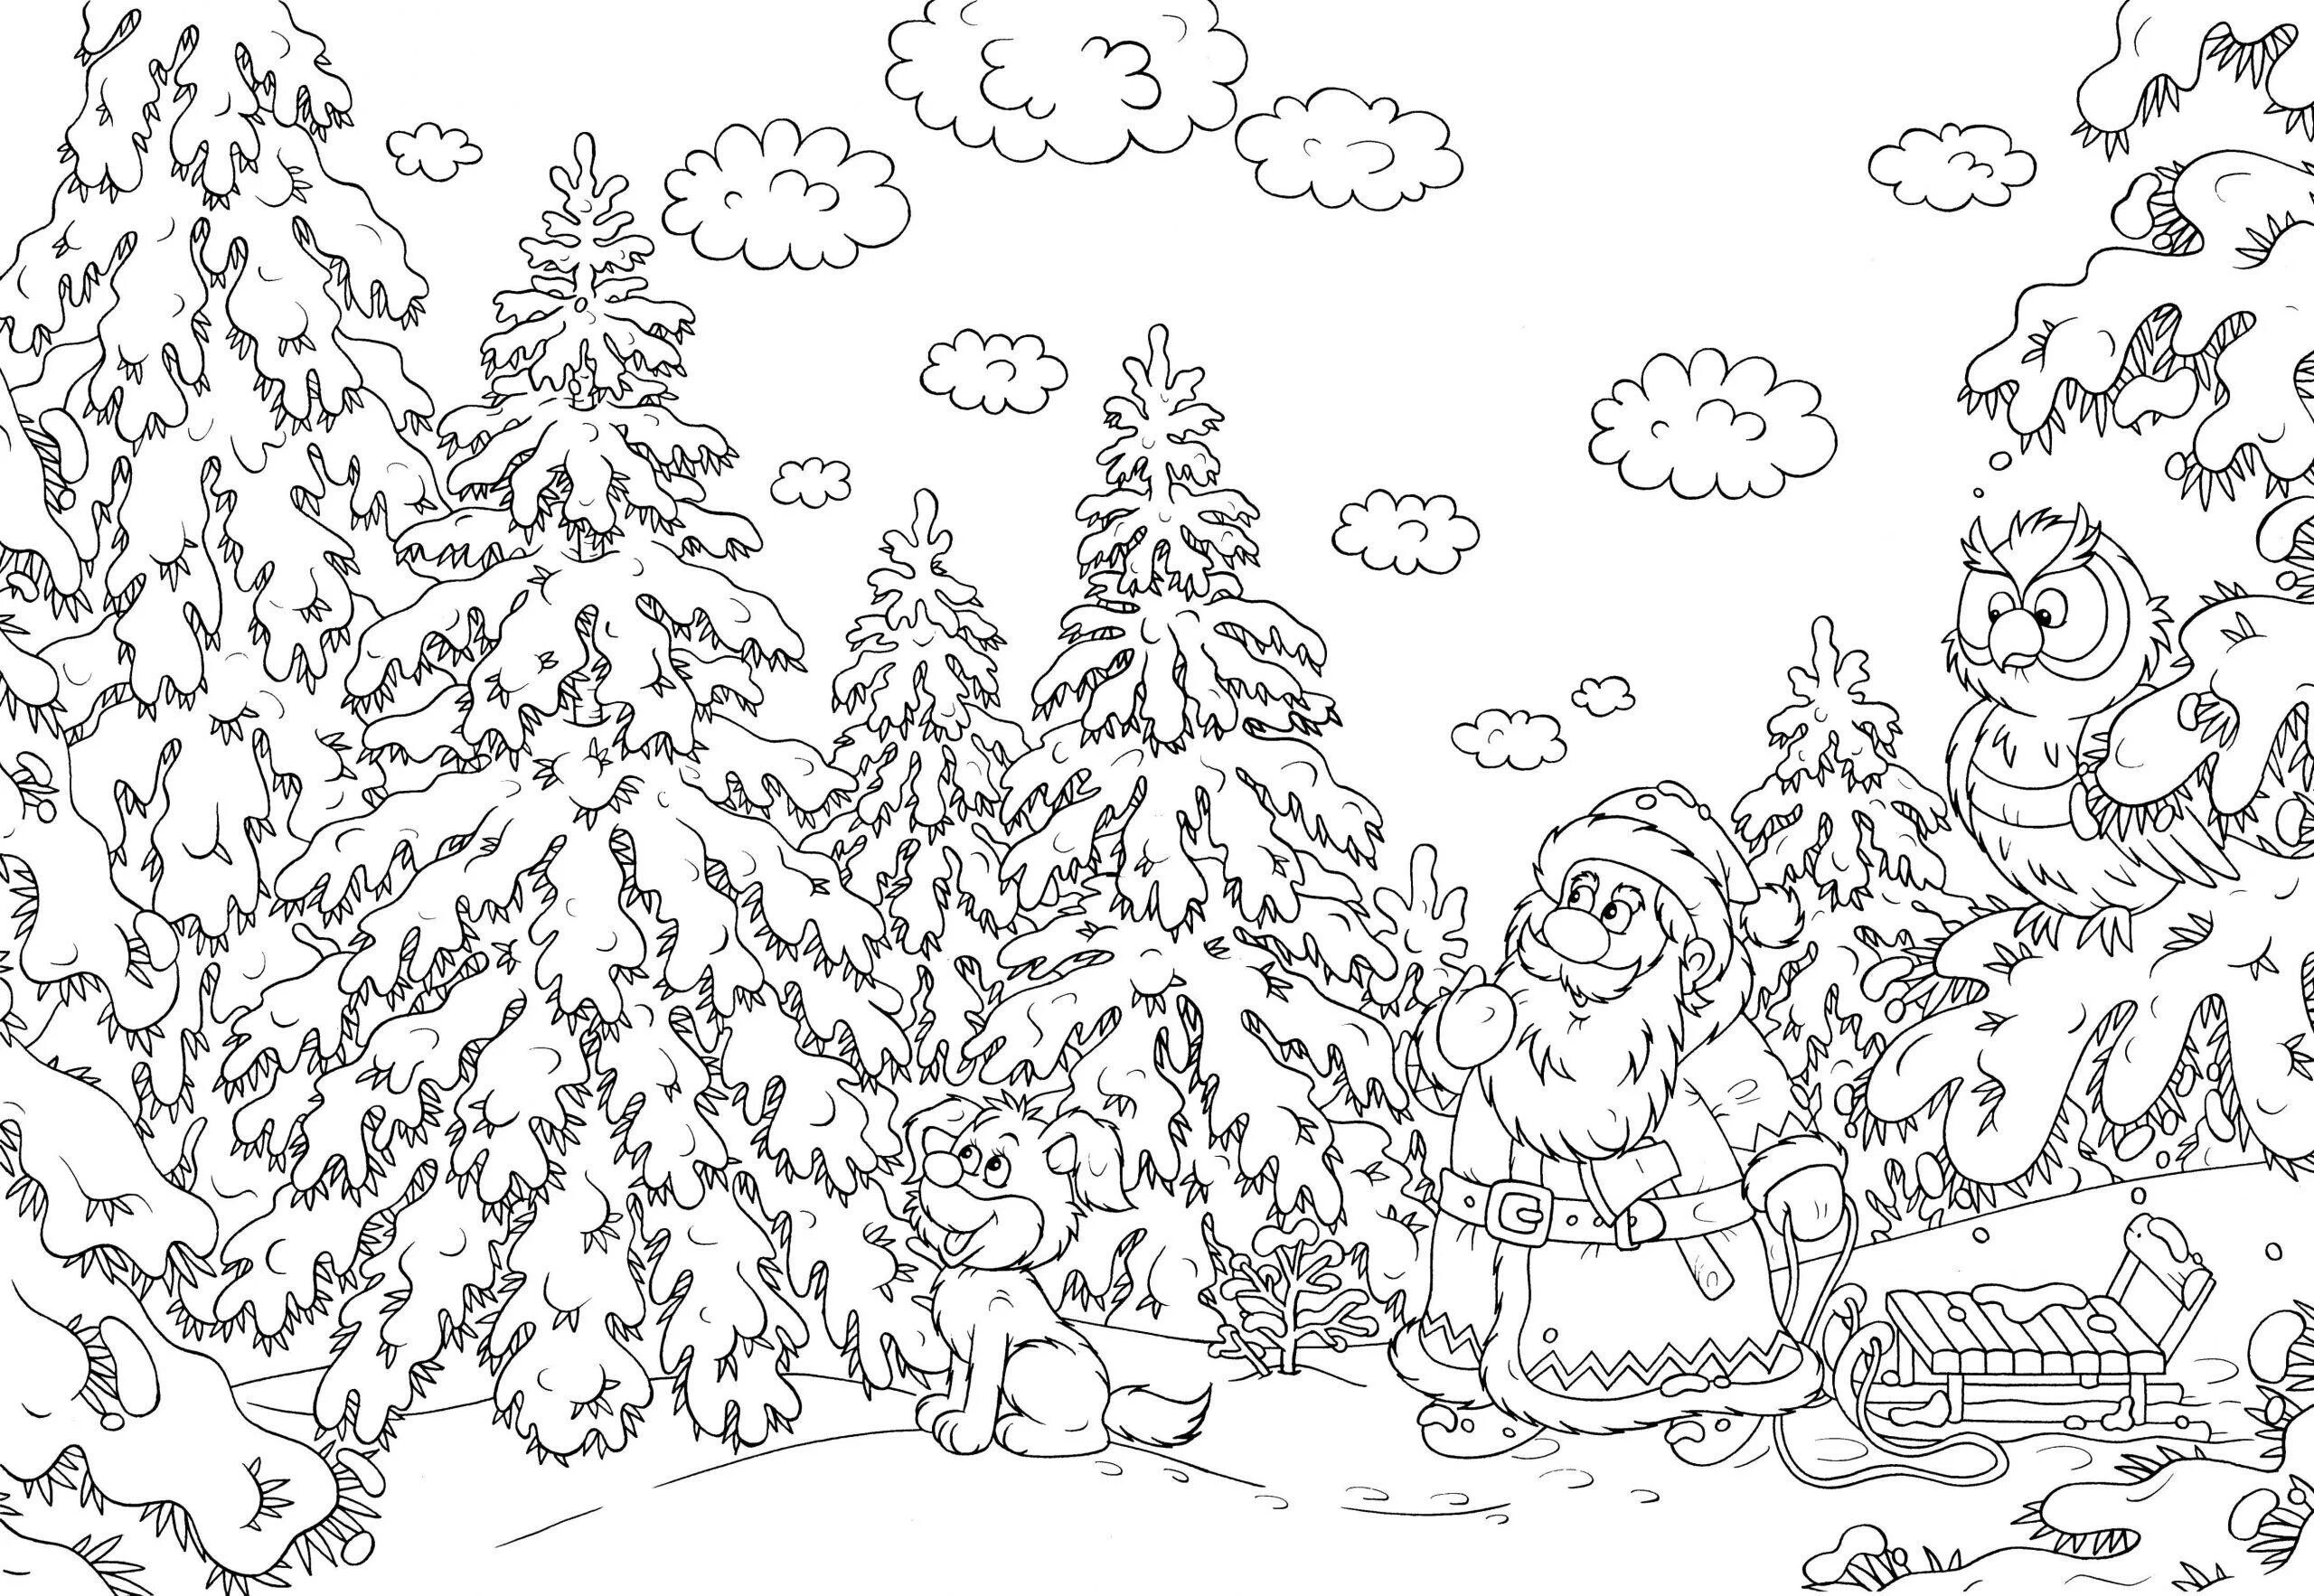 Coloring book shimmering forest grew a Christmas tree